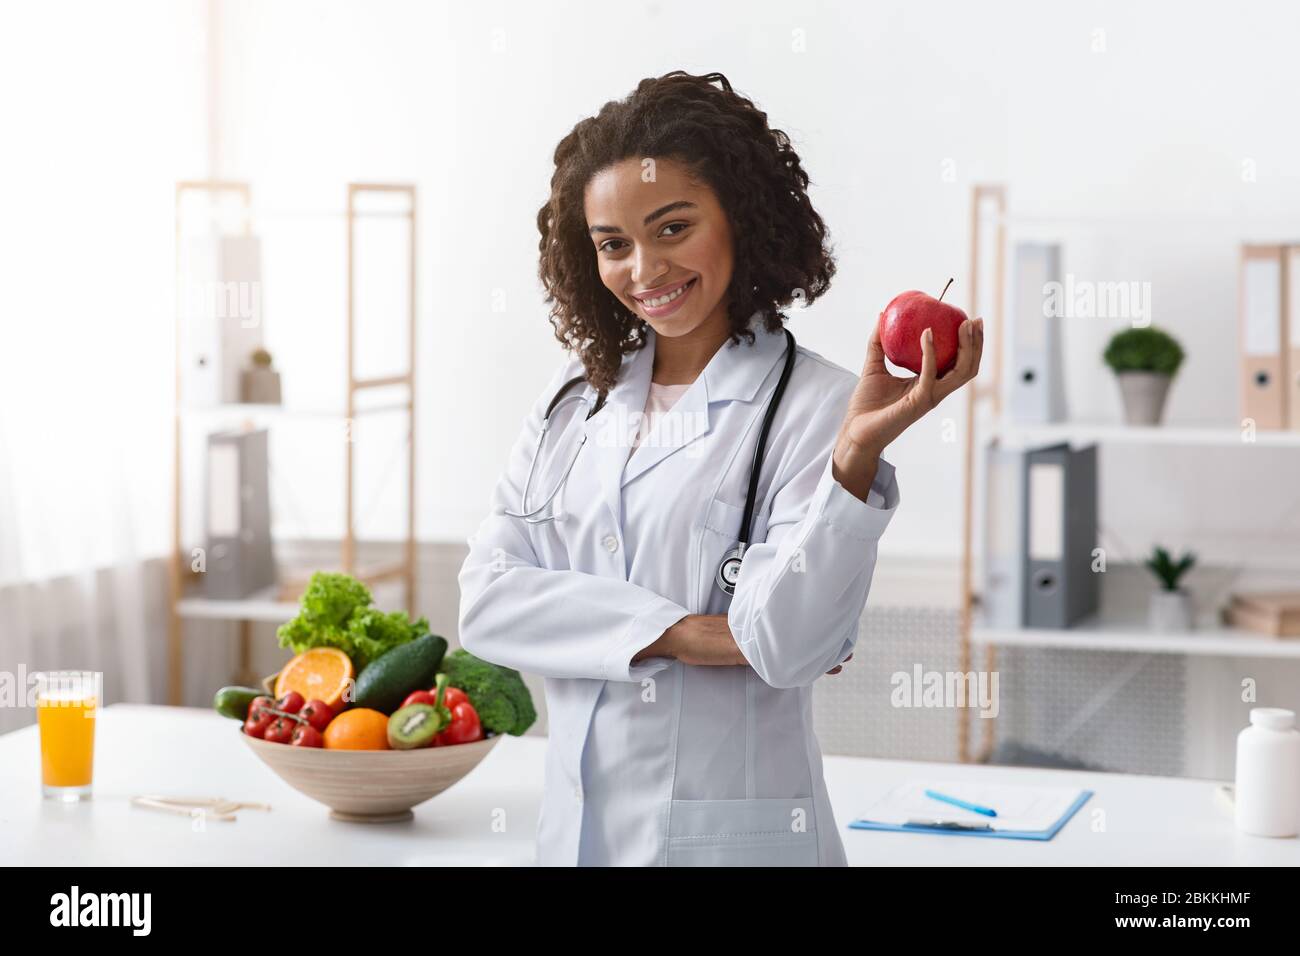 Positive female nutritionist posing at clinic, holding apple Stock Photo